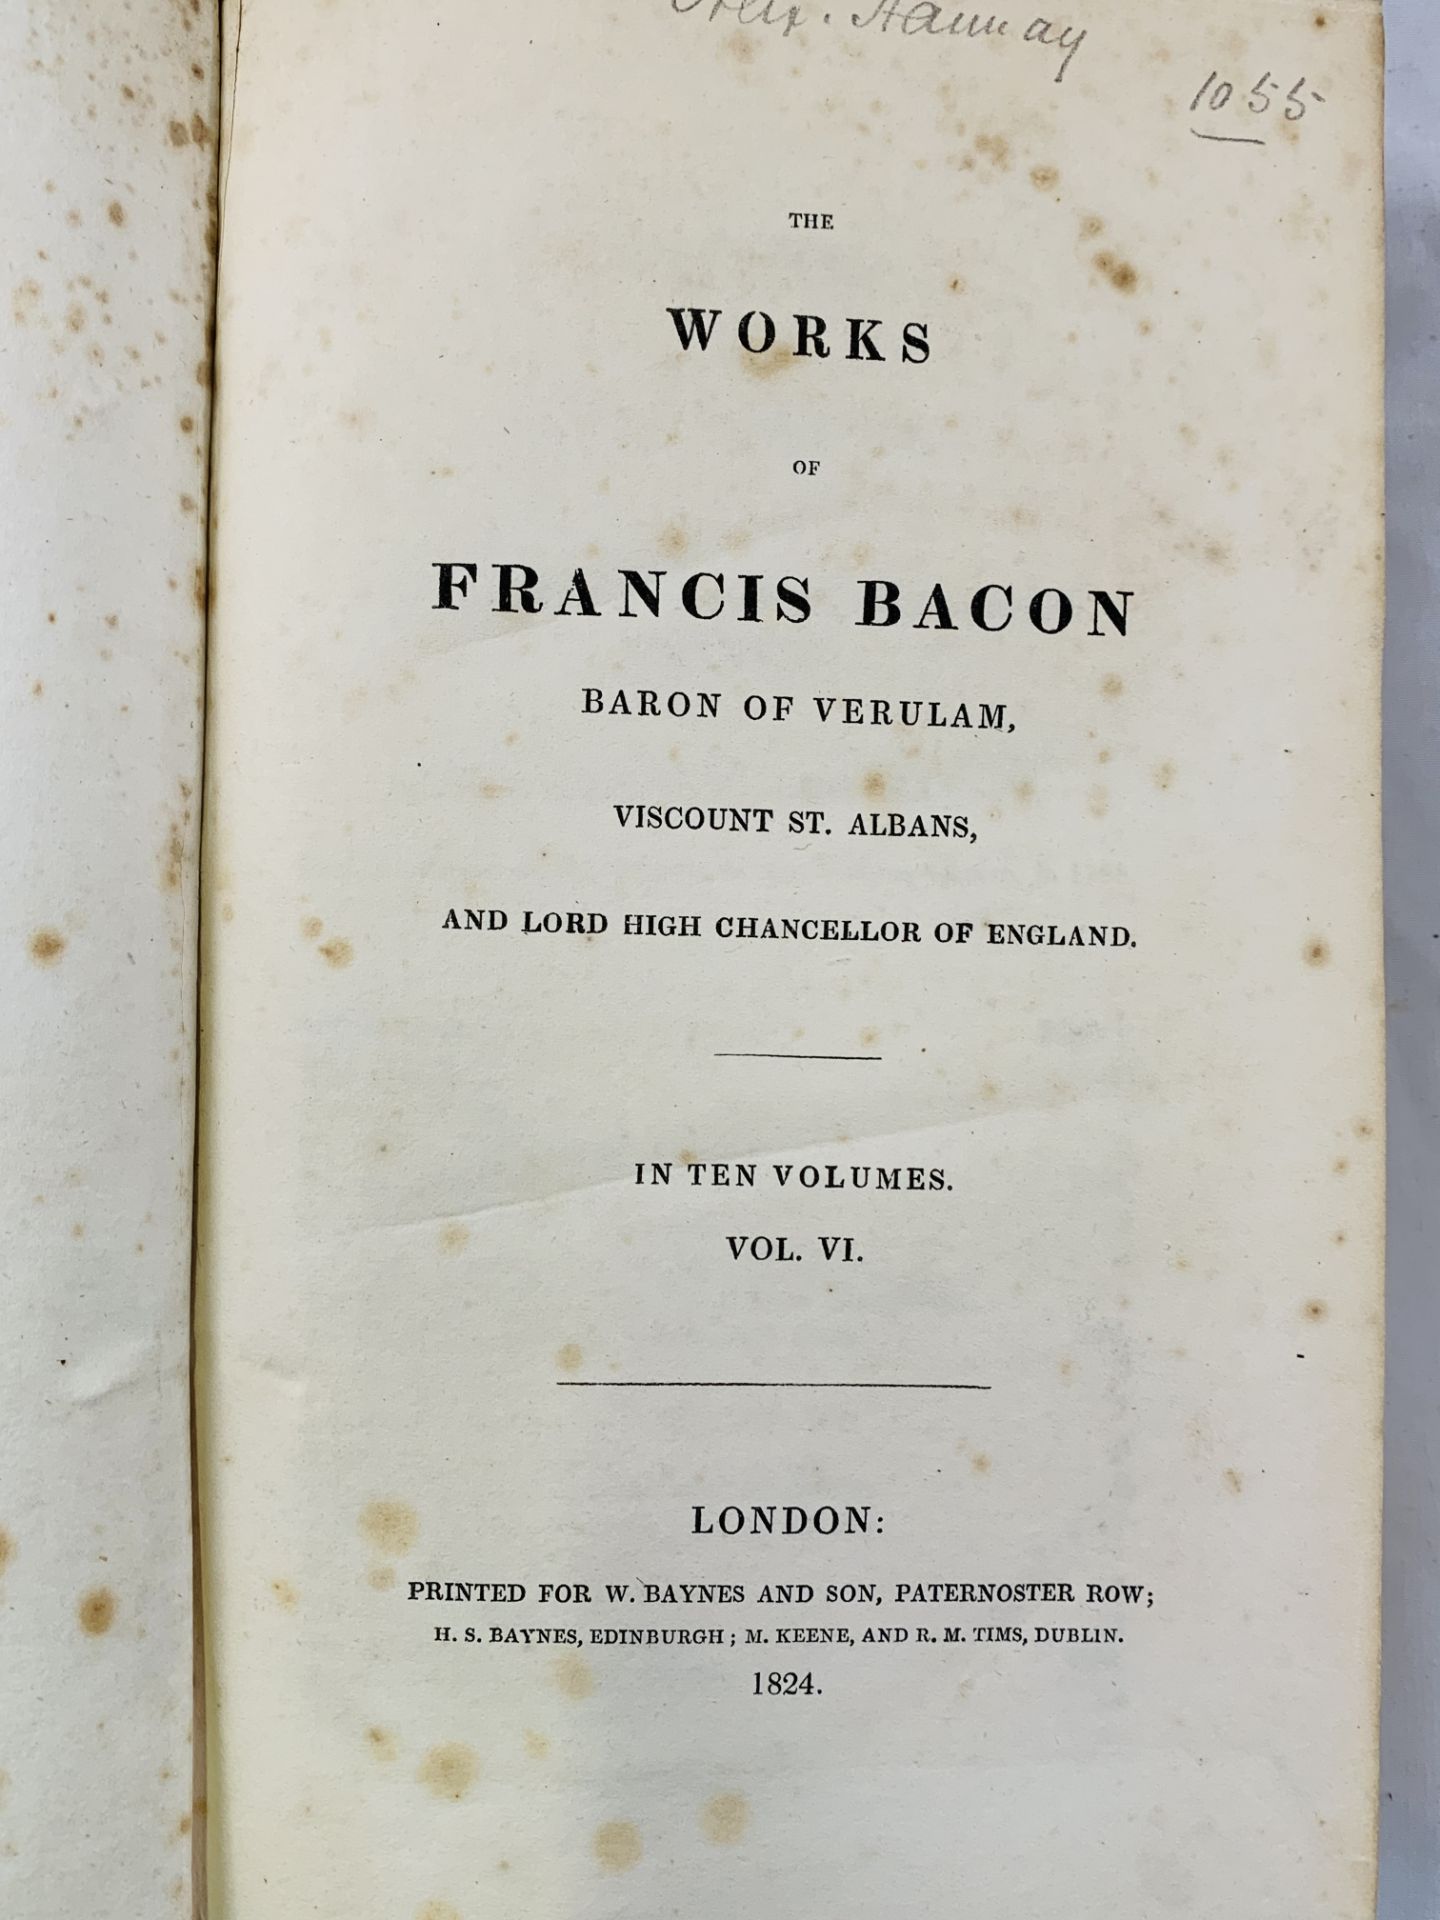 The Works of Francis Bacon, 10 volume set published 1824 - Image 2 of 4